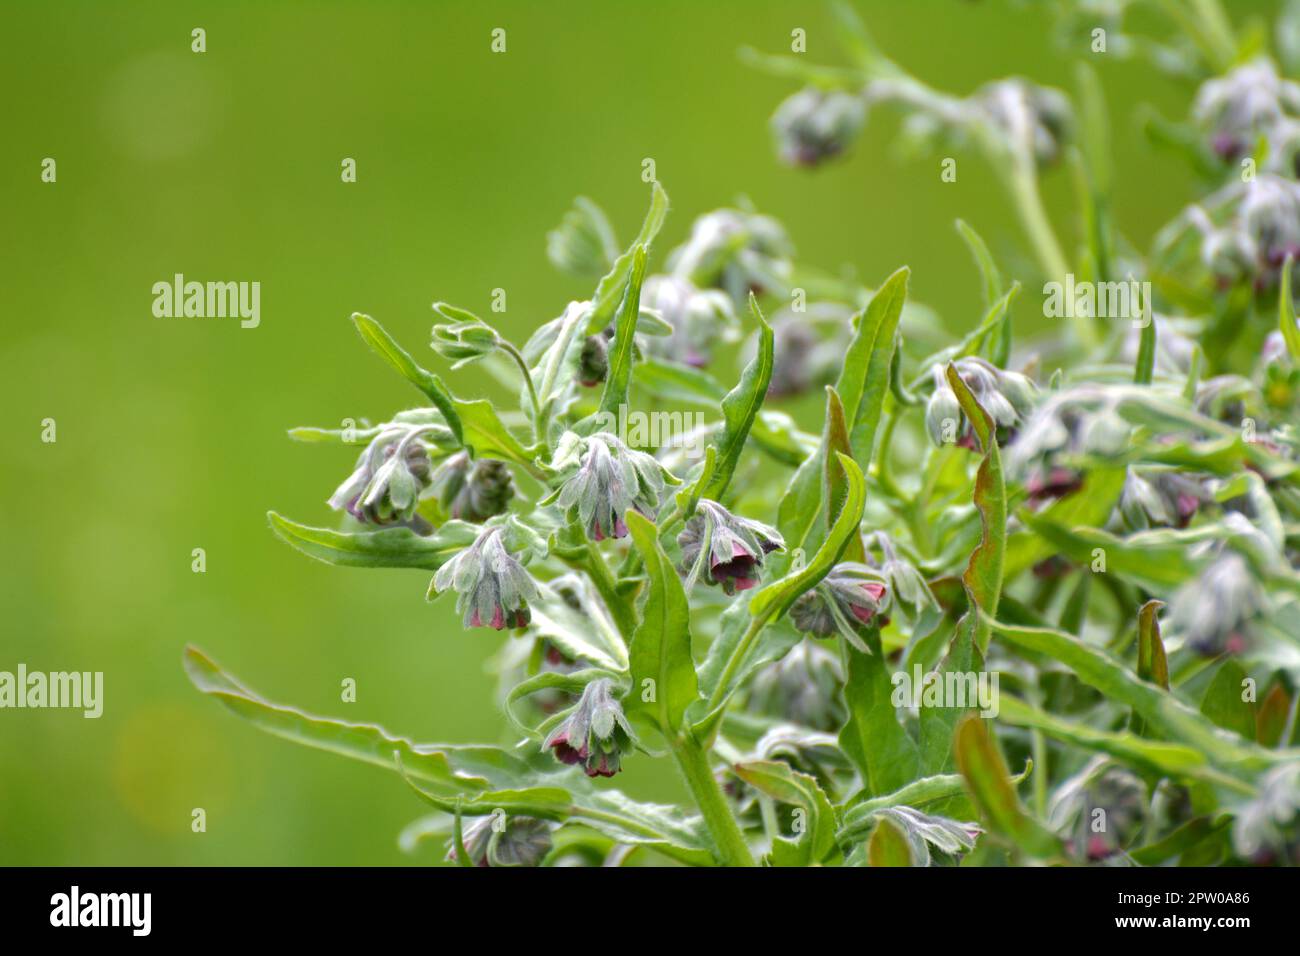 In the wild, Cynoglossum officinale blooms among grasses Stock Photo